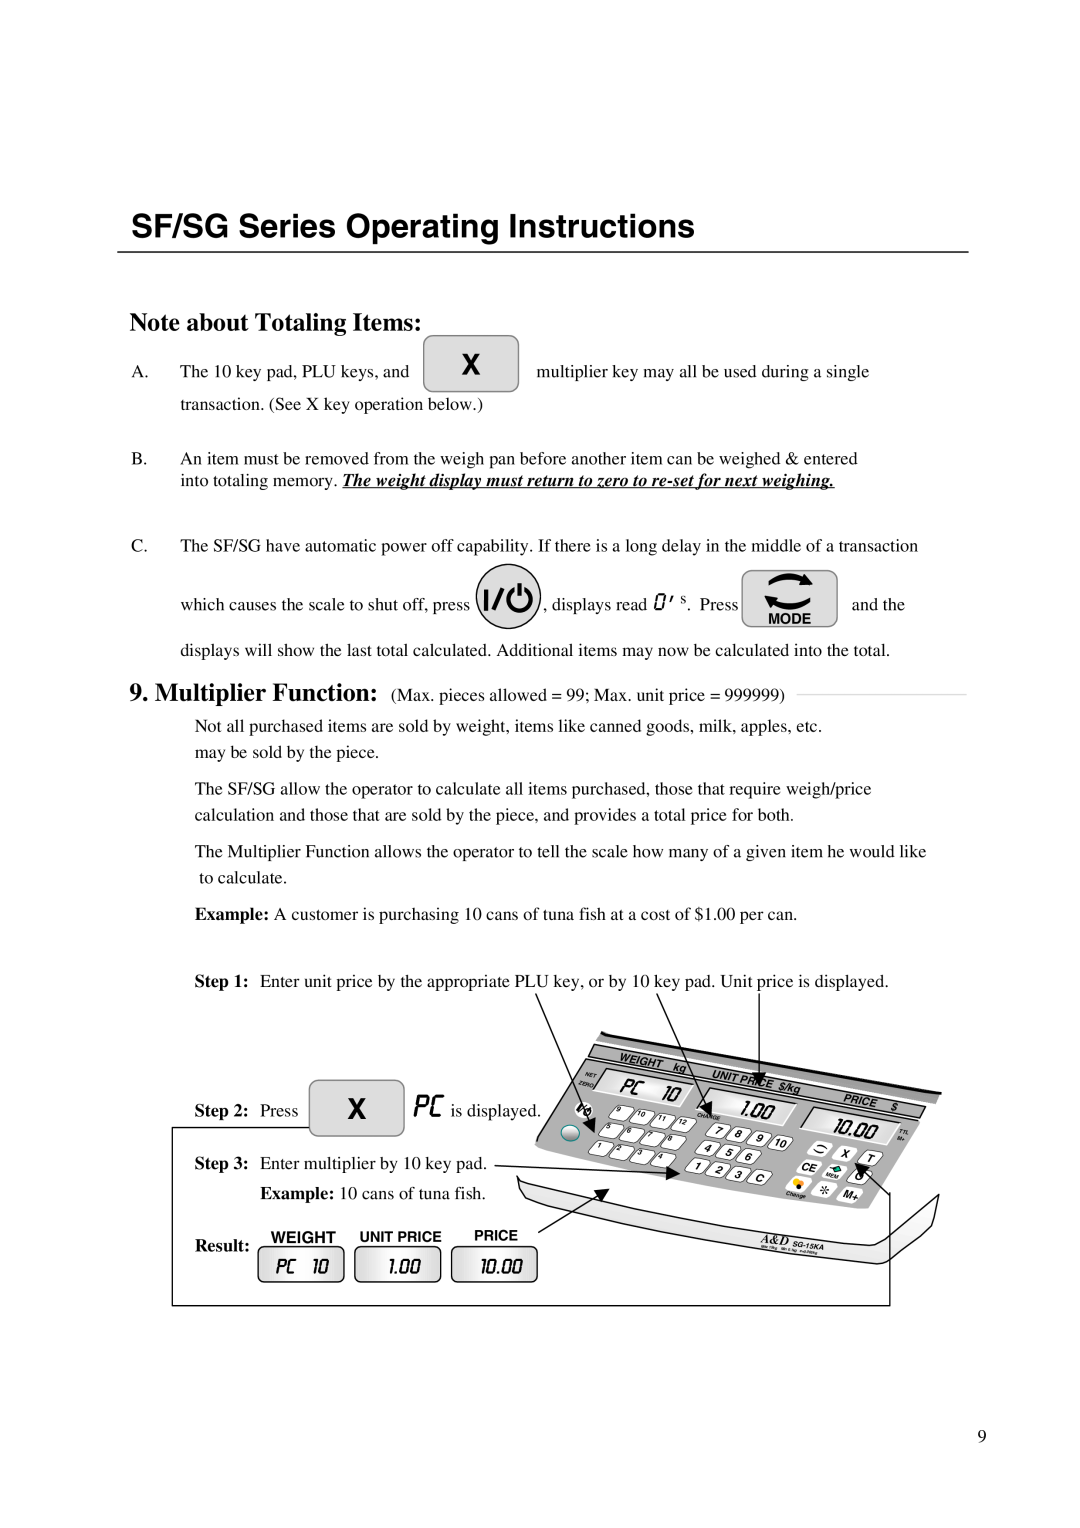 A&D instruction manual Note about Totaling Items, 1.00, 10.00, SF/SG Series Operating Instructions, Press, Result 